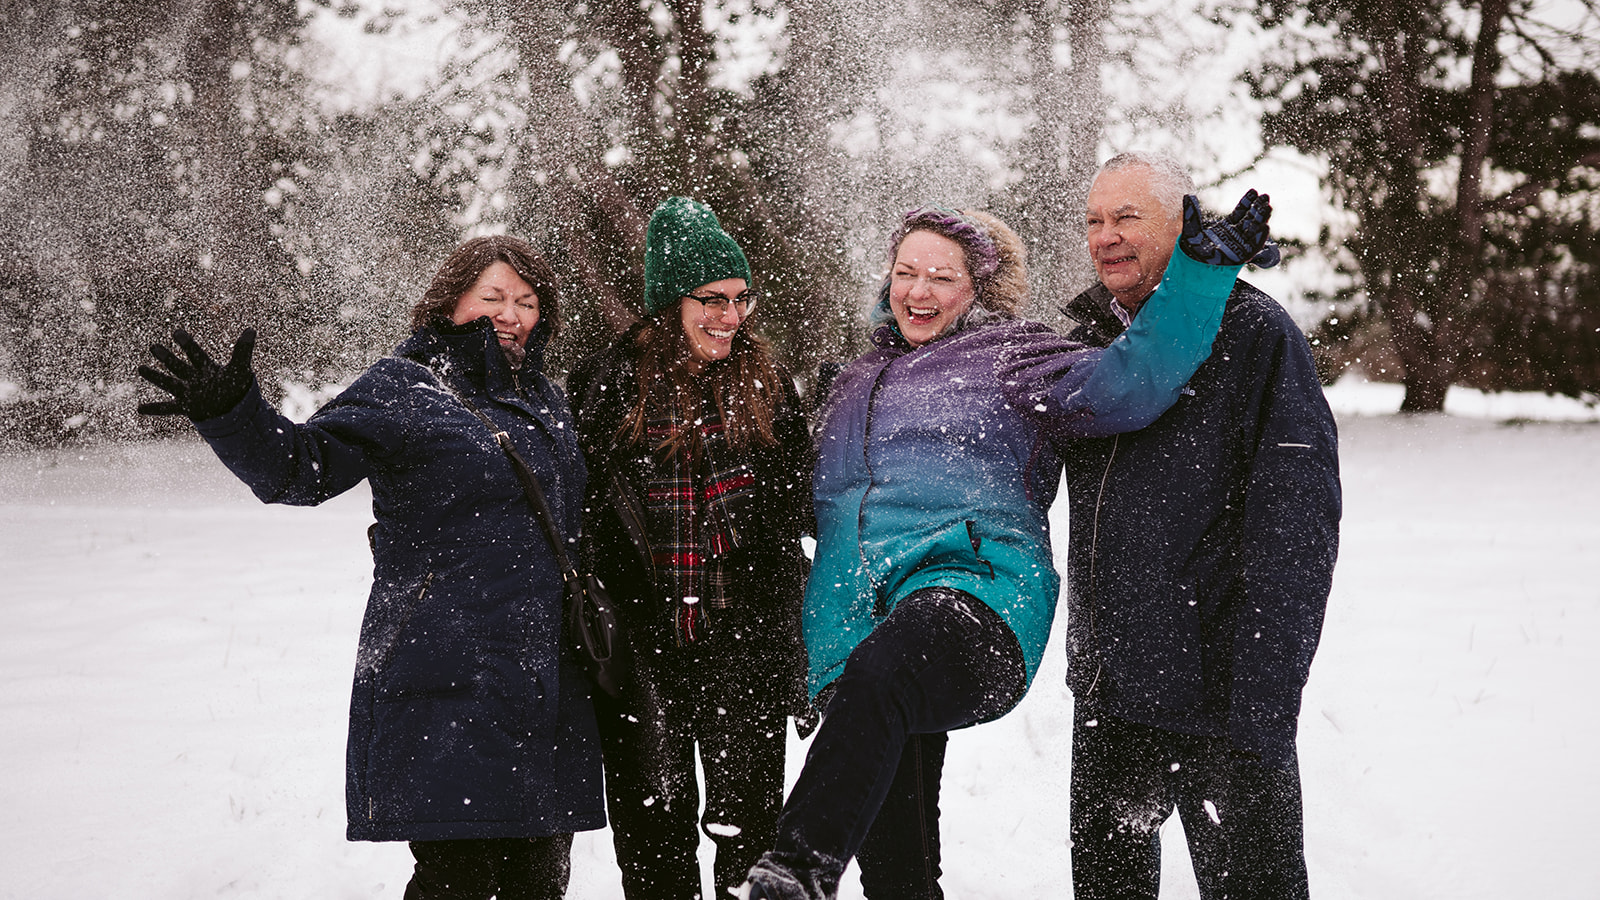 Family laughing and kicking up snow together